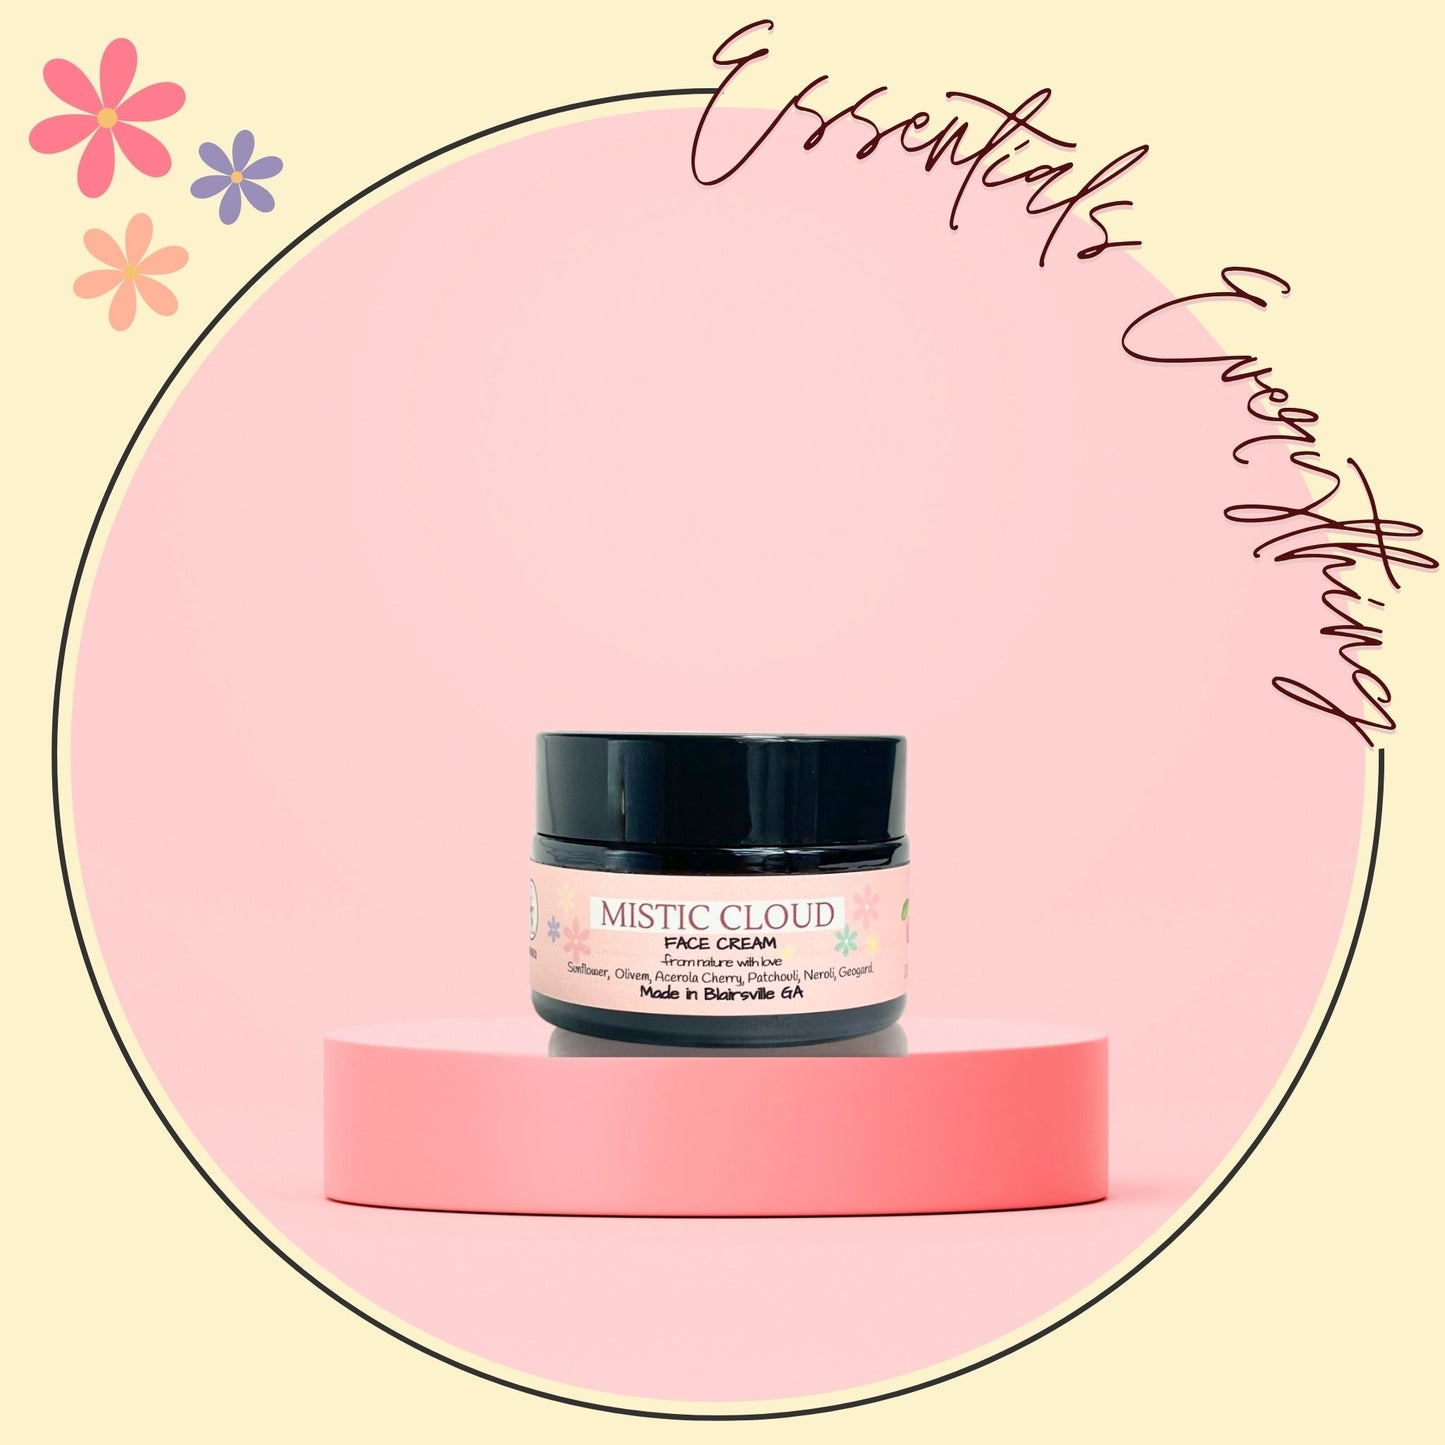 Mistic Cloud - All Natural Anti-Aging Face Cream with Acerola Cherry & Vitamin C. For All Skin Types. By Essentials Everything Skin Care Co. Organic, Vegan & Cruelty-Free. 1 oz. 